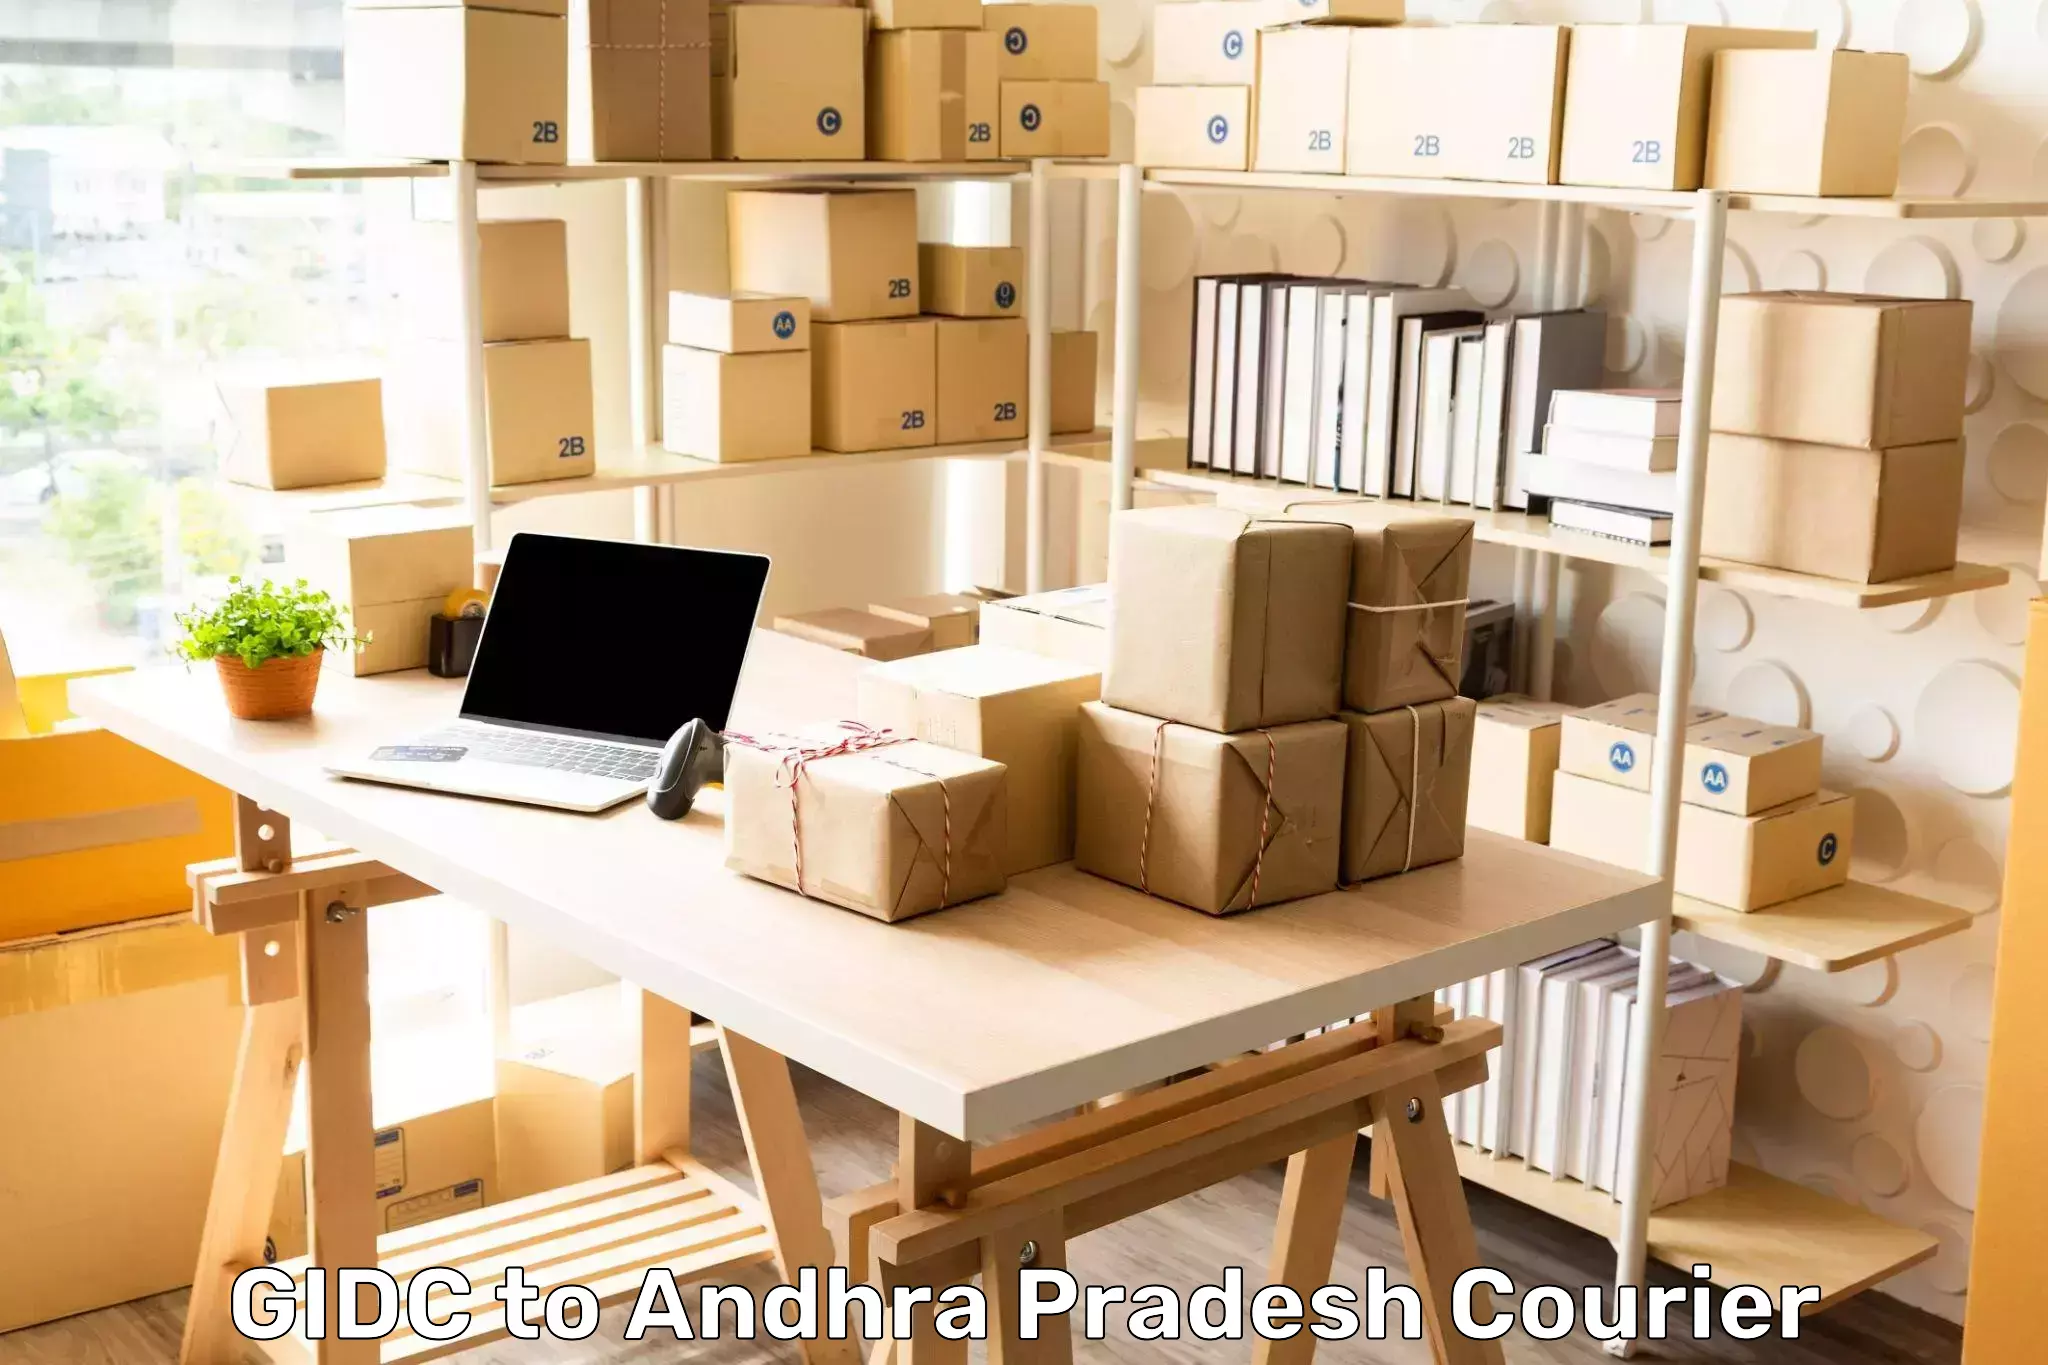 On-demand courier in GIDC to Tripuranthakam